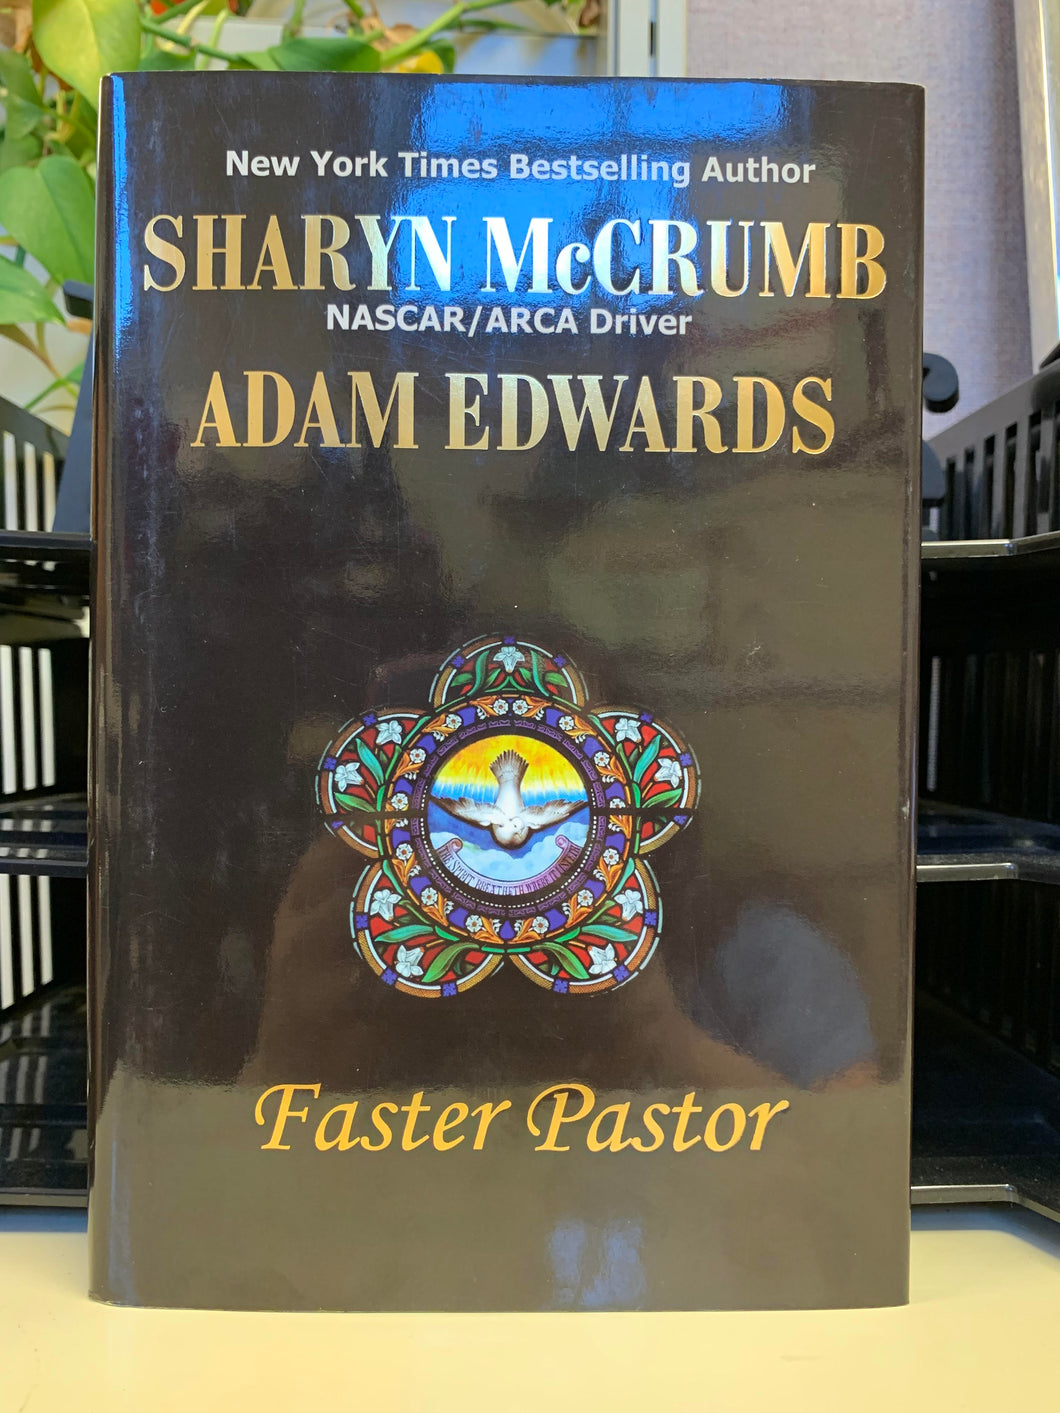 Faster Pastor by Sharyn McCrumb and Adam Edwards